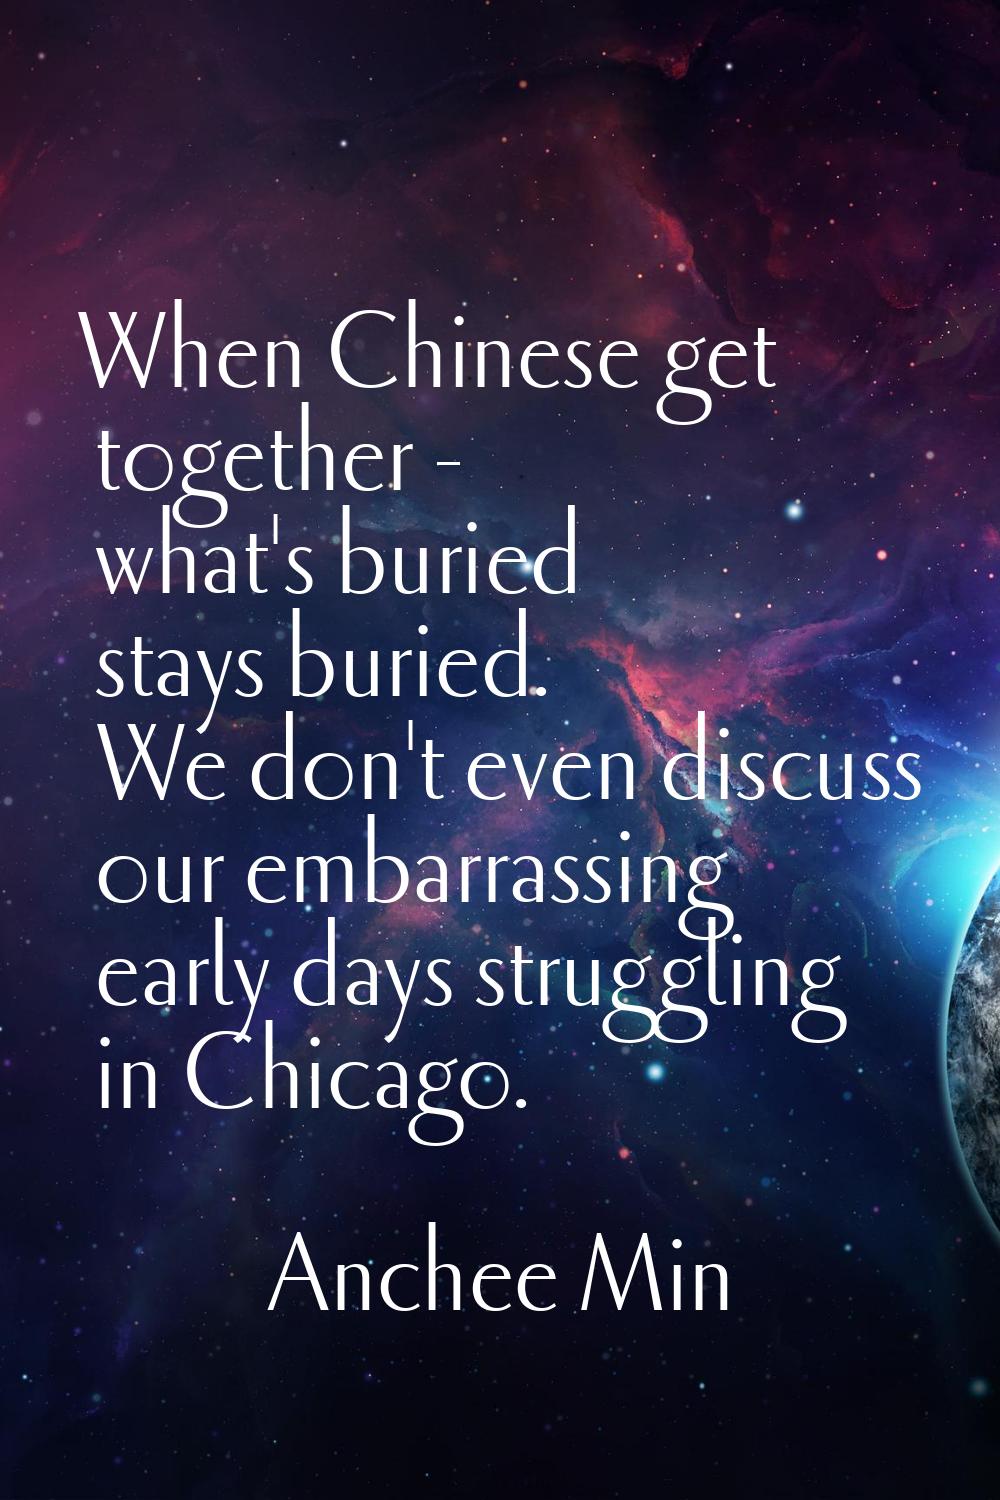 When Chinese get together - what's buried stays buried. We don't even discuss our embarrassing earl